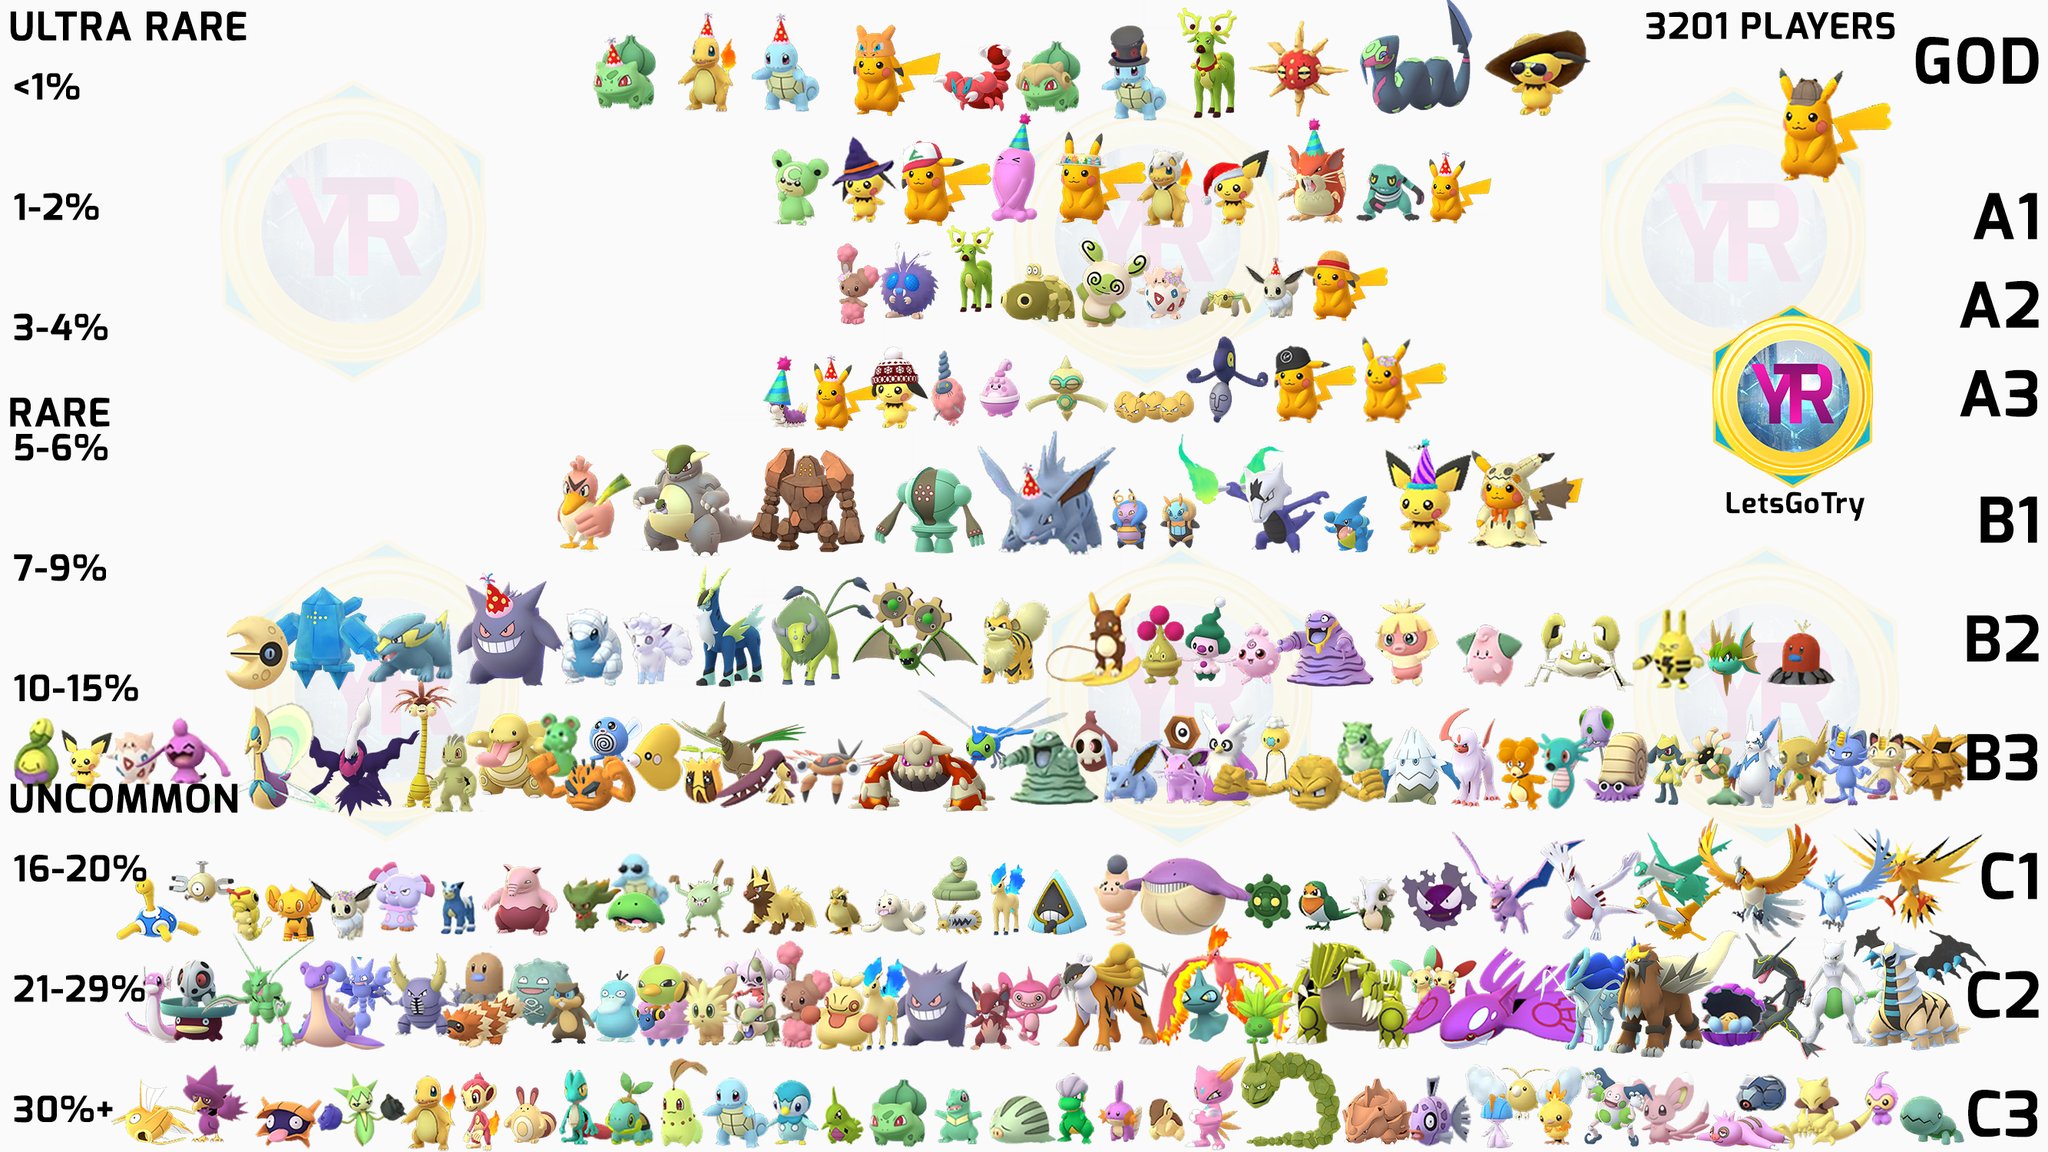 Letsgotry List Of The Rarest Shiny Pokemon In Pokemongo In 5 Shinylist Shinypokemon Not Enough Data For New Pokemon Like Voltorb No Timburr And Flower Crown Pichu Yet